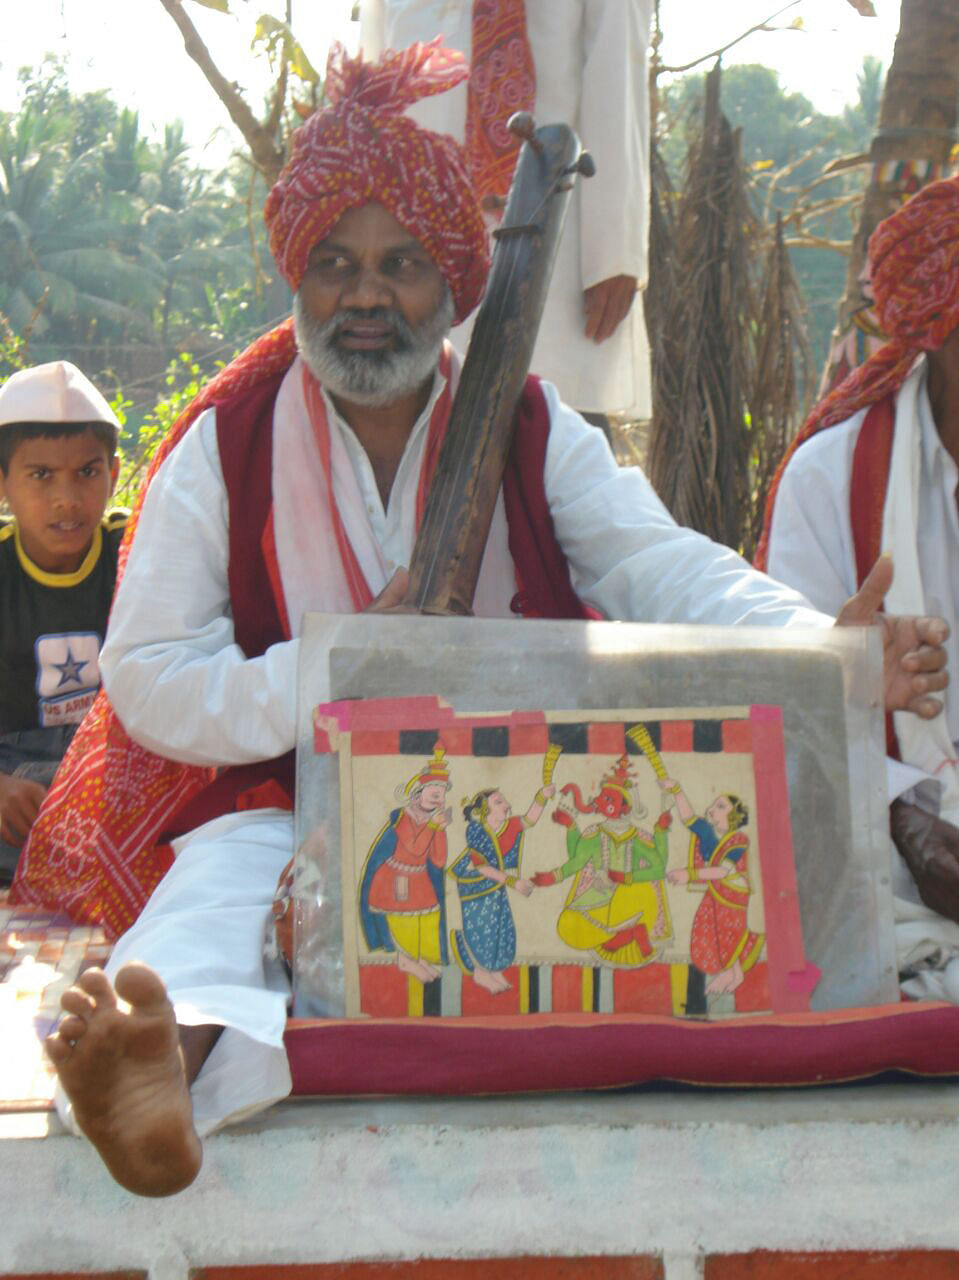 Once spies for Shivaji, the 400-year-old Thakar tribe is reviving its lost art of puppeteering and storytelling.